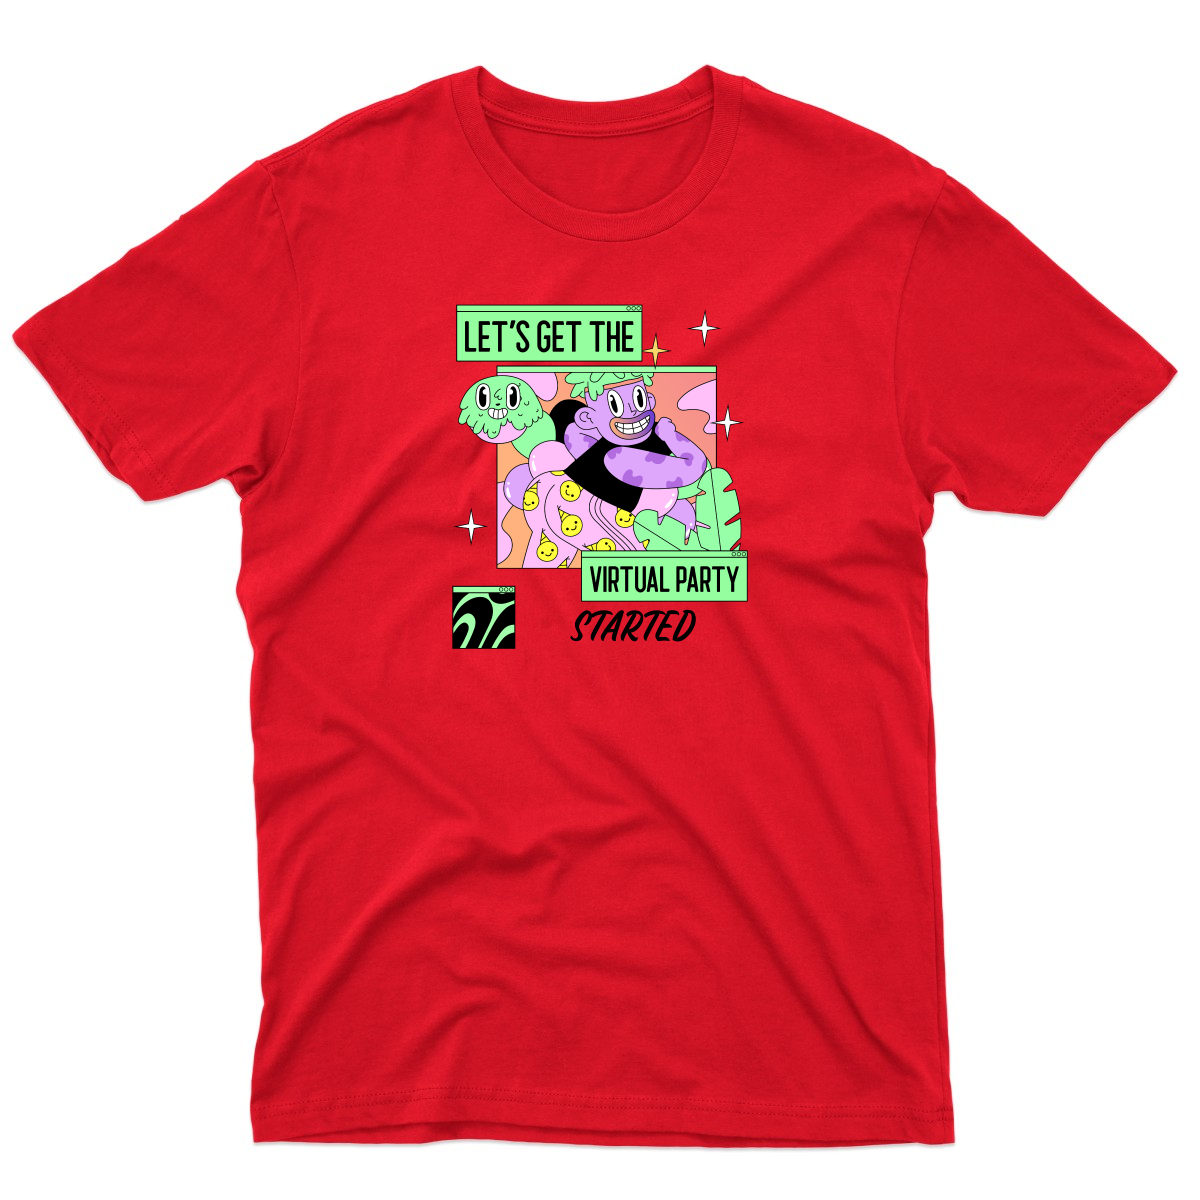 Let's get the virtual party started Men's T-shirt | Red